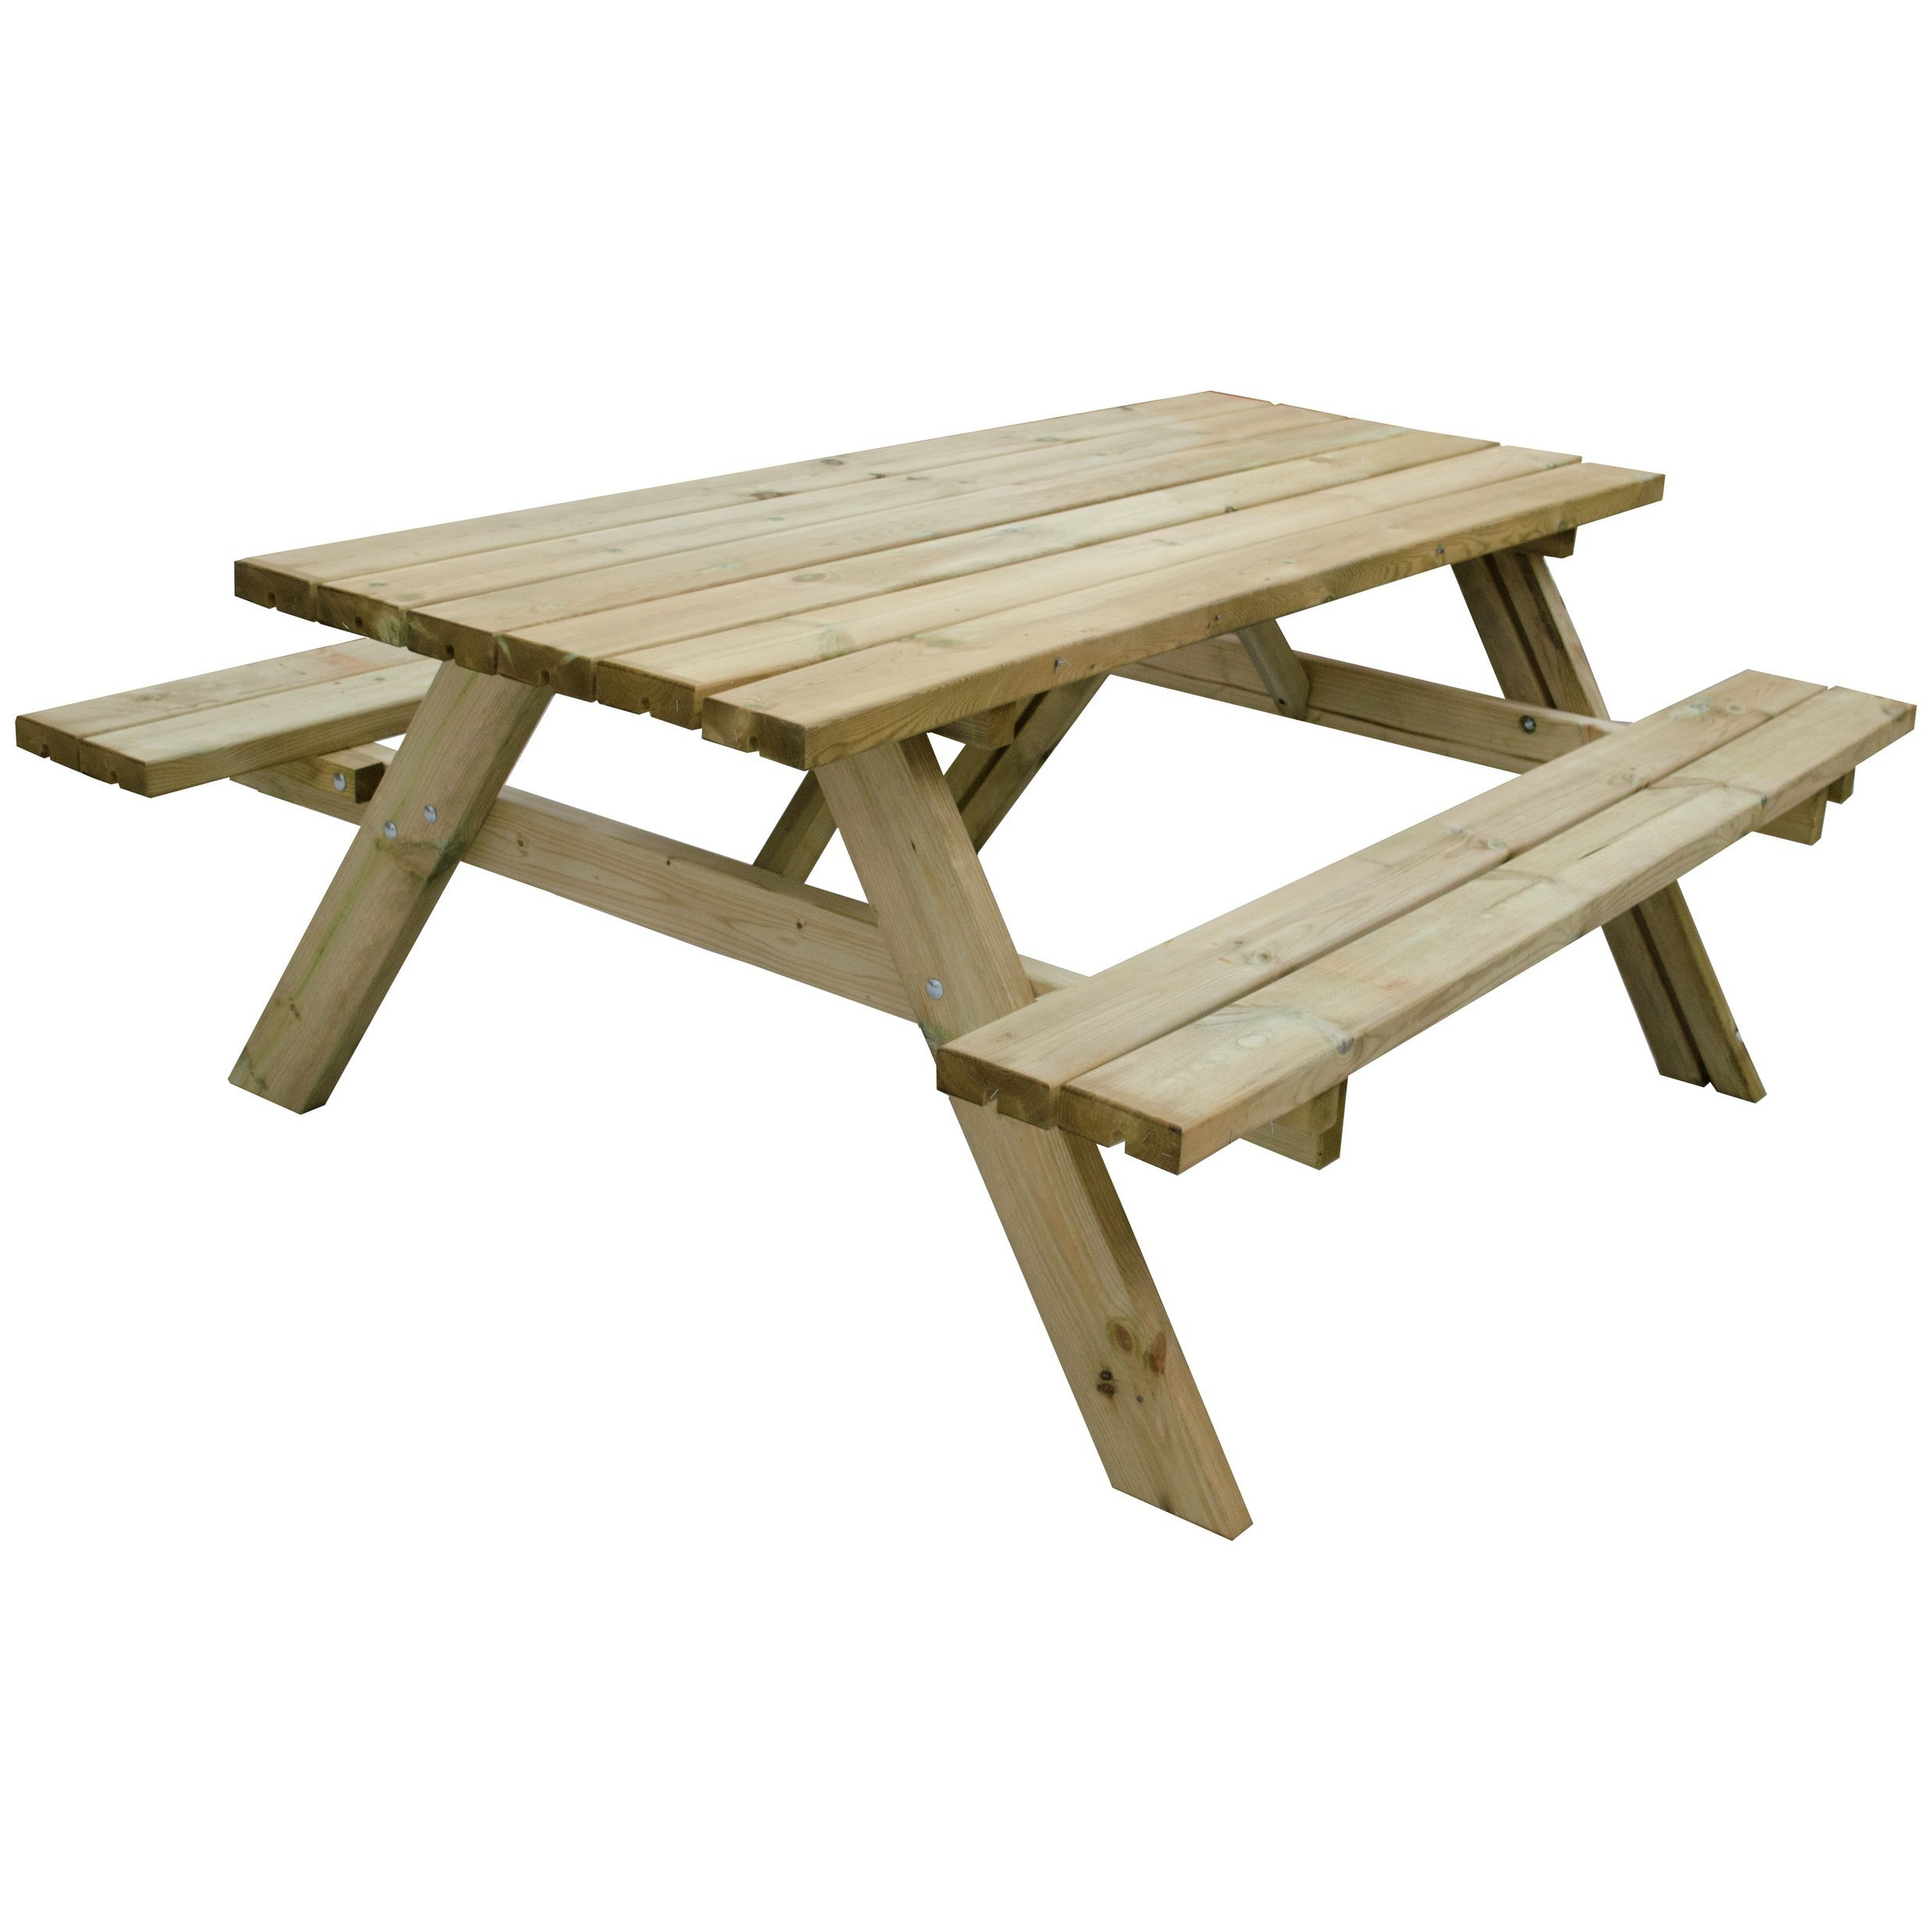 Forest Garden 8 Seater Wooden Rectangular Picnic Table - image 1